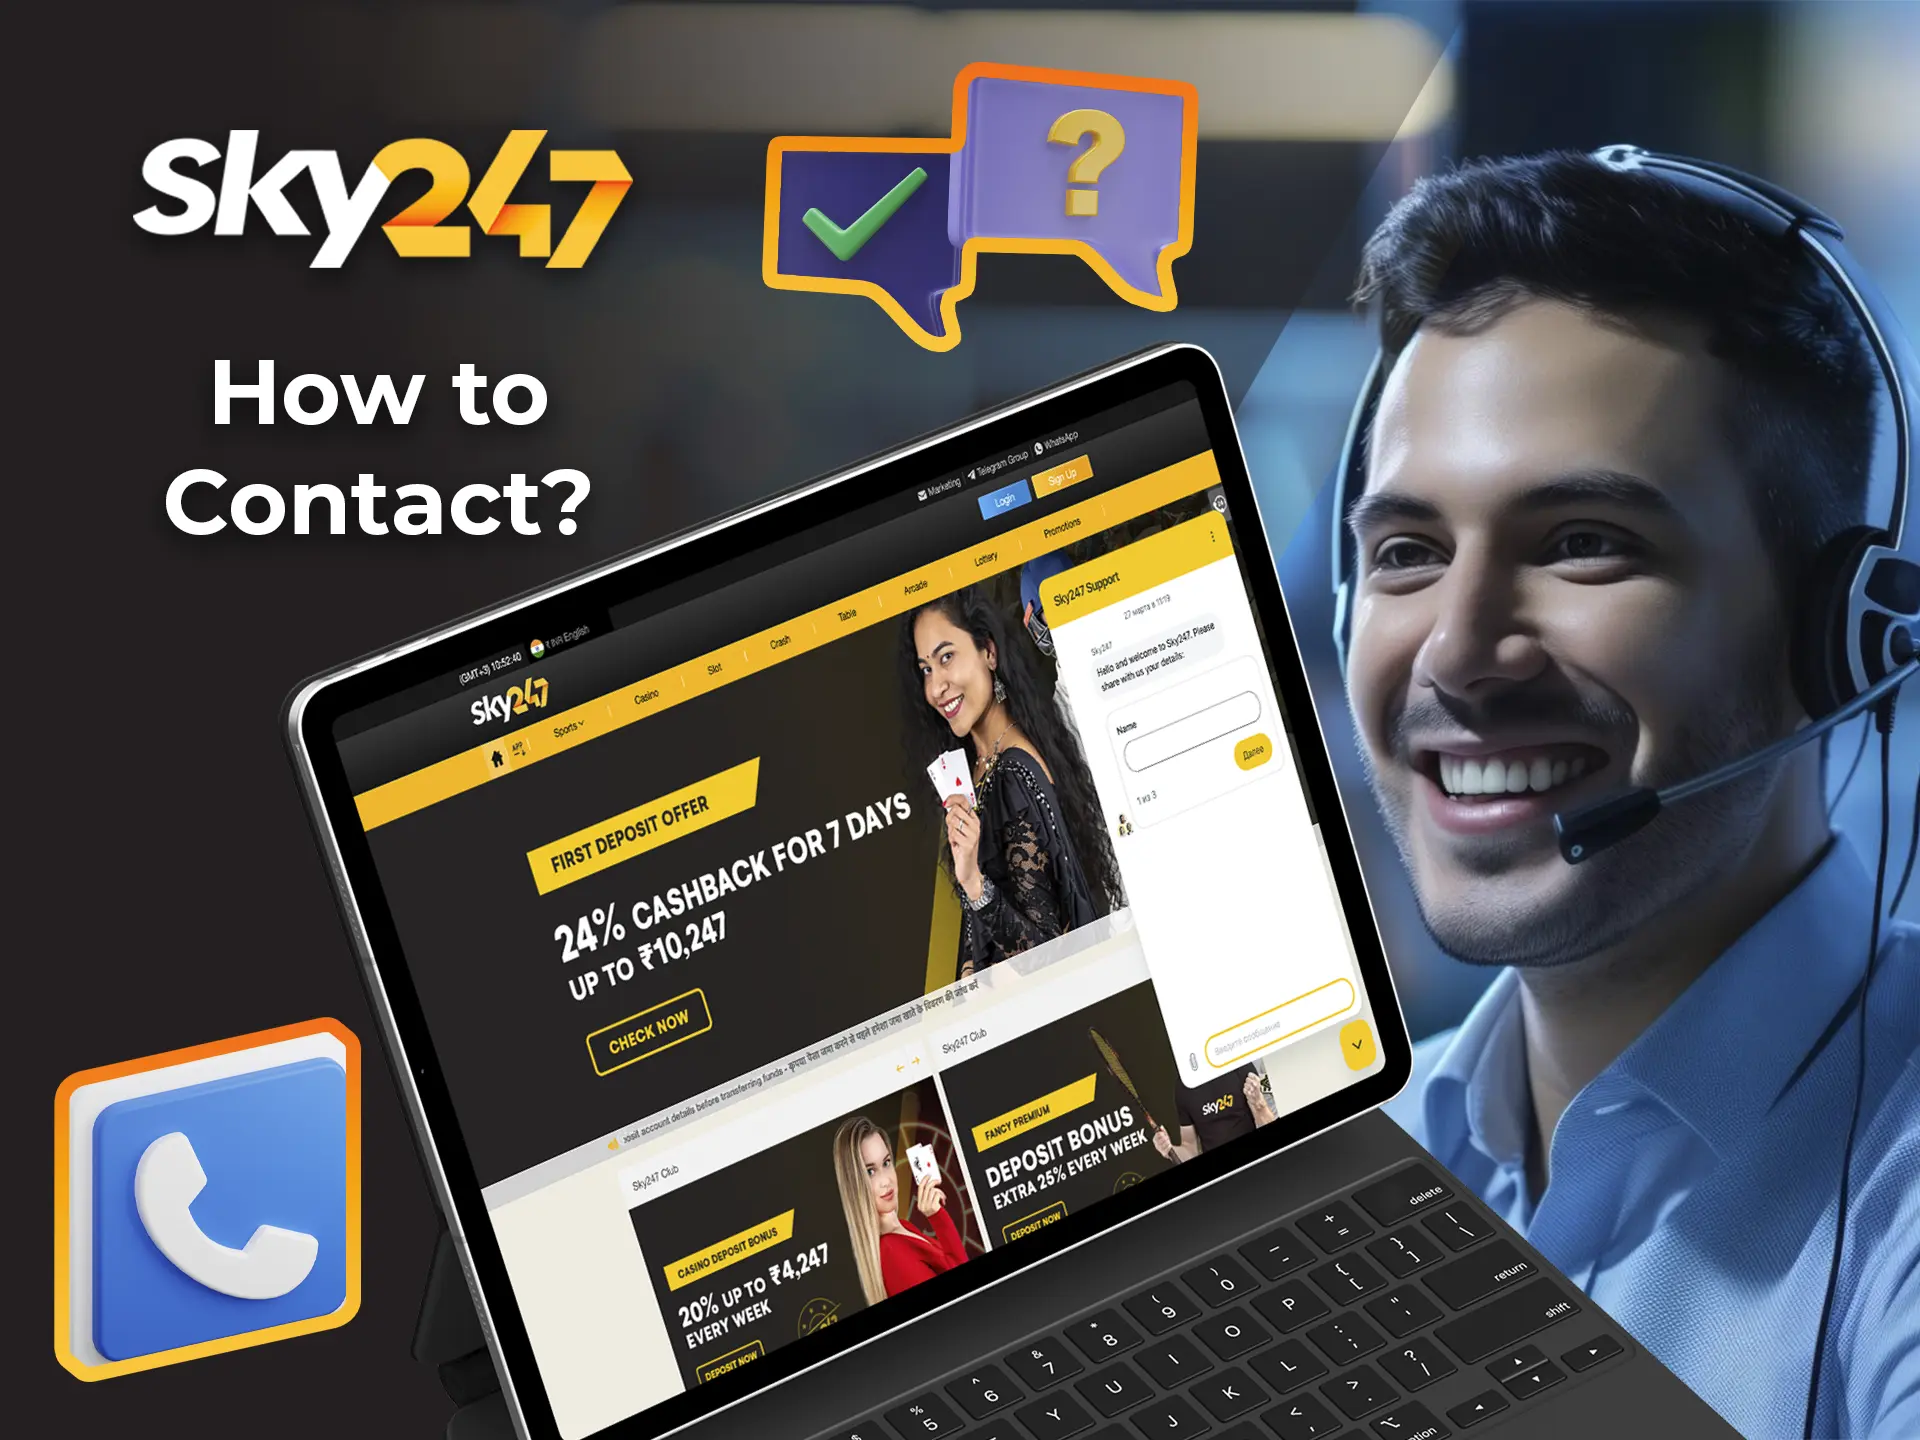 Contact Sky247 customer service and they will help you with any question you may have.